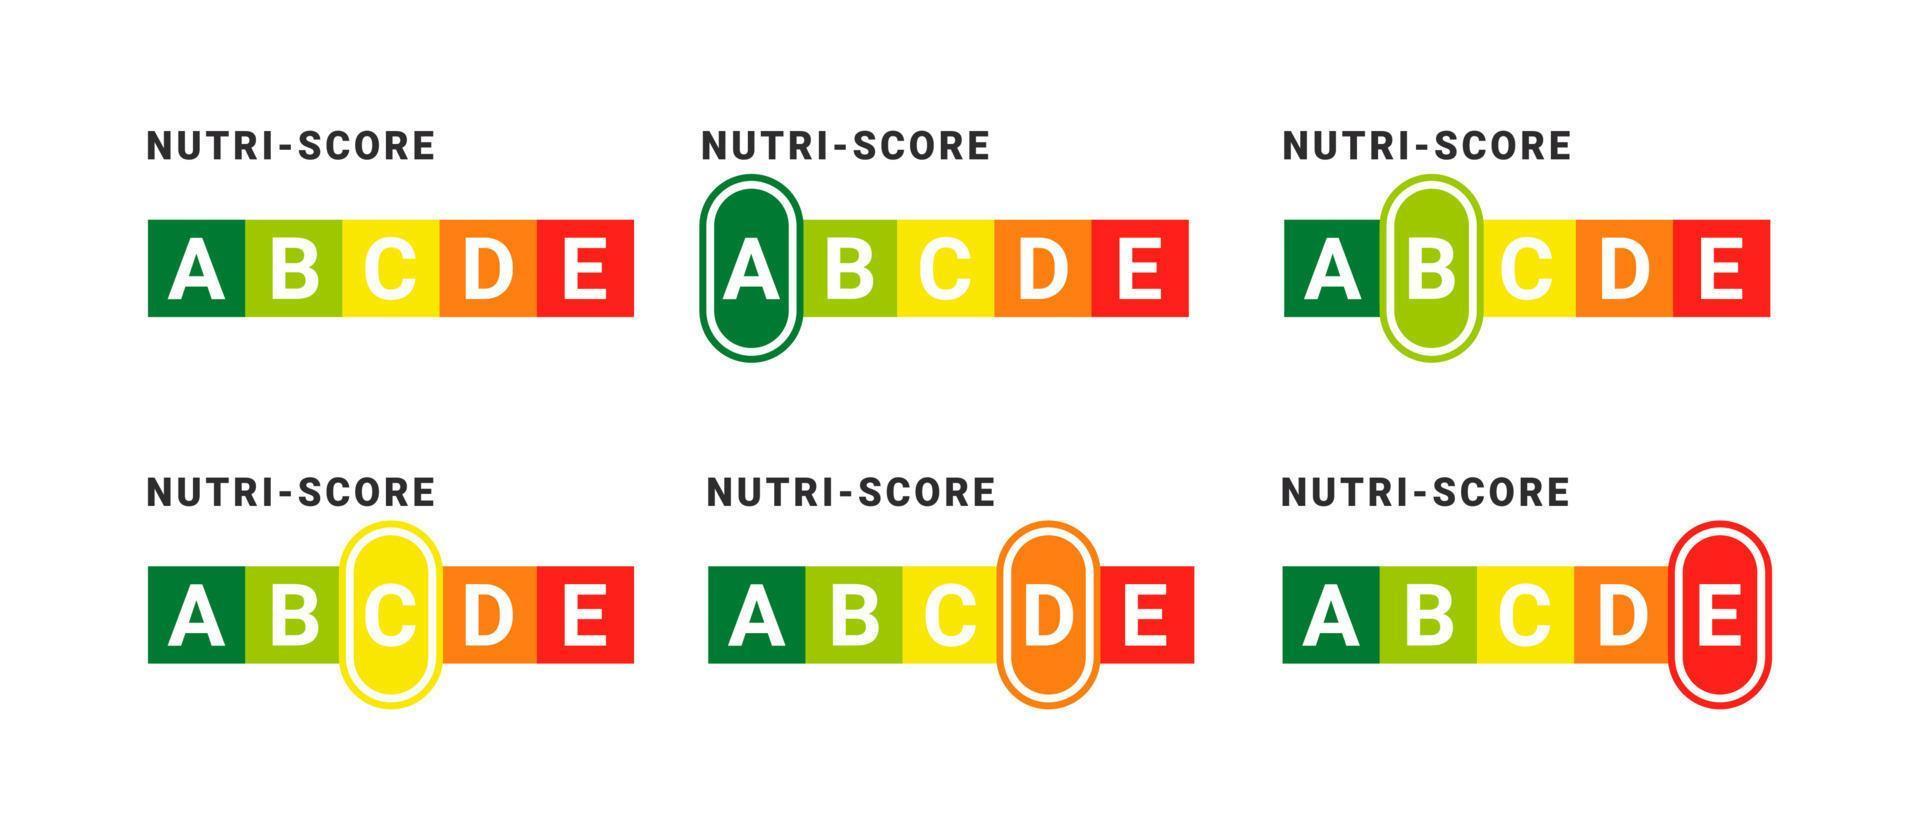 Nutri-score badges concept. Food rating system signs. Health care nutrition indicator. Nutri-score stickers. Vector illustration